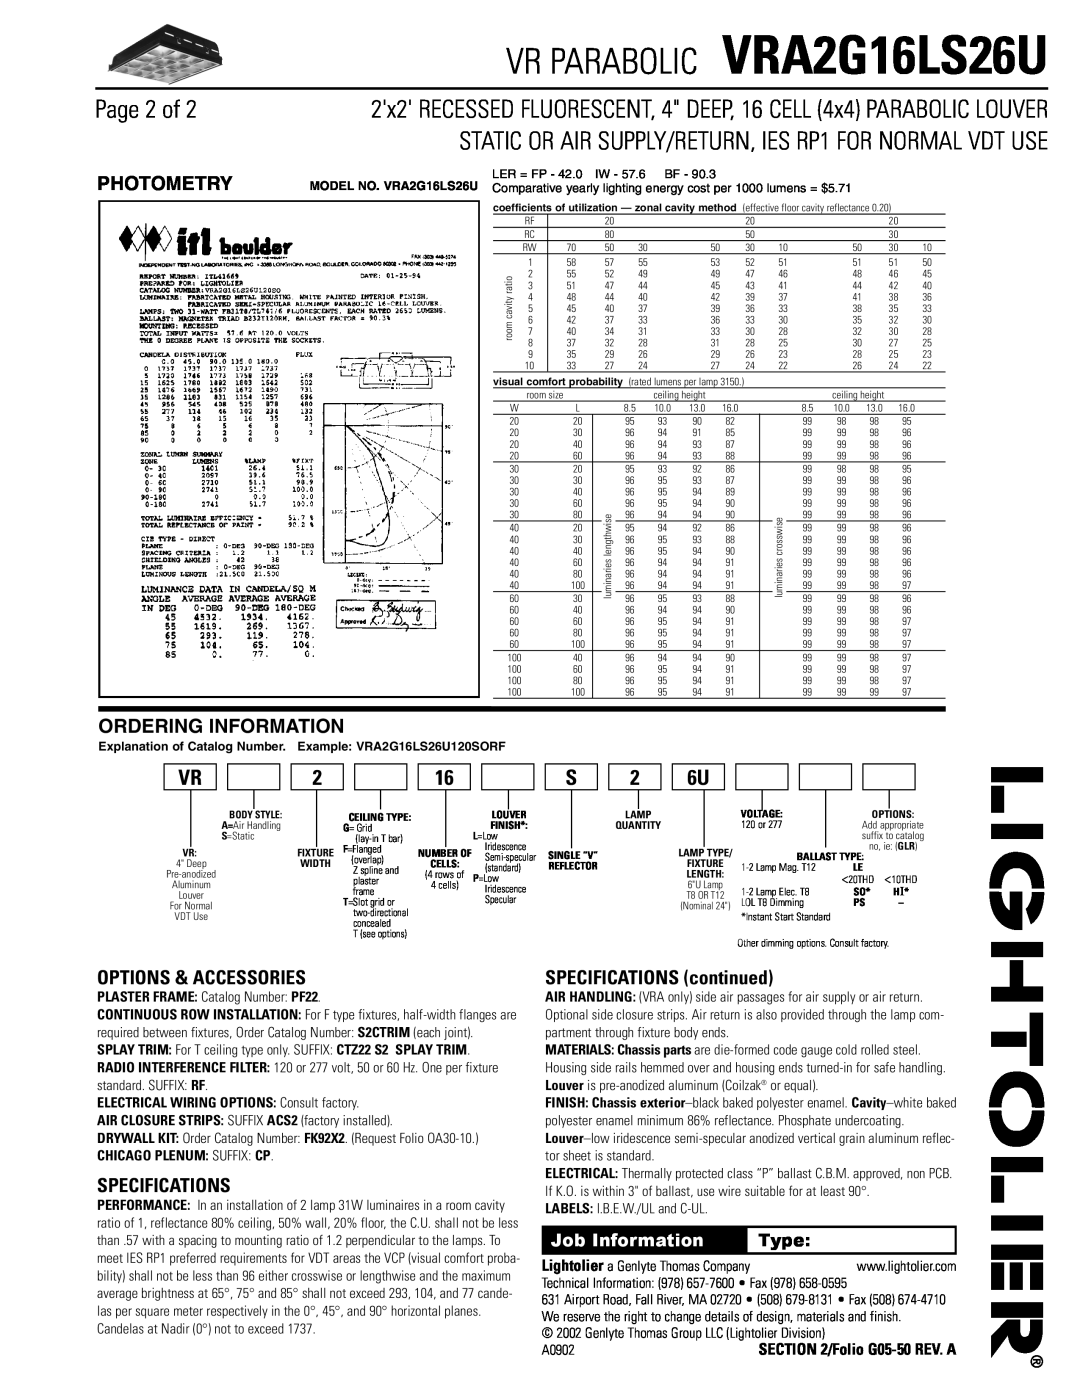 Lightolier VRA2G16LS26U Page 2 of, Options & Accessories, Specifications, SPECIFICATIONS continued, Photometry, Type 